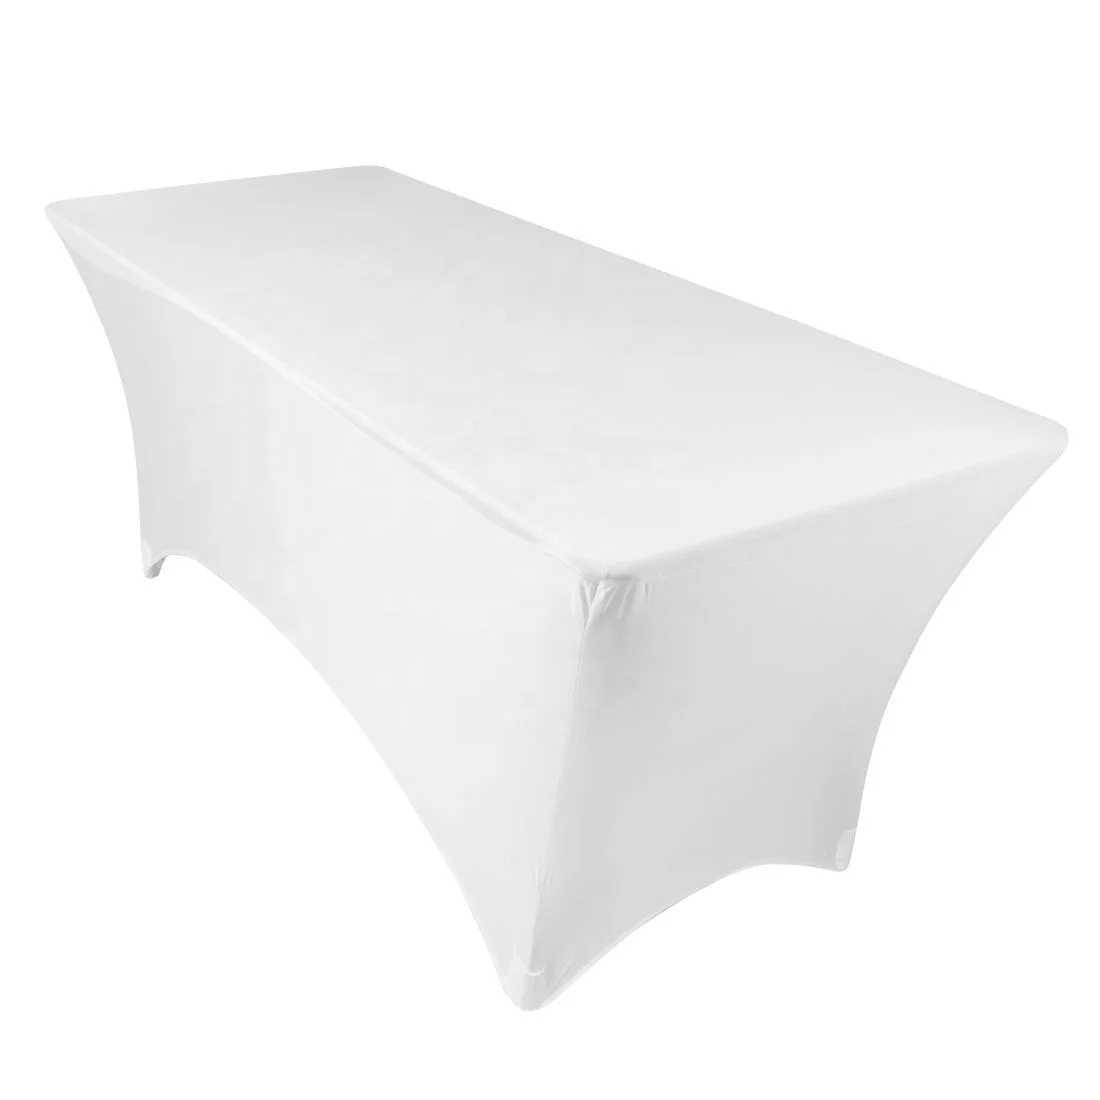 
Wedding party 6ft spandex stretch tablecloth table cover 